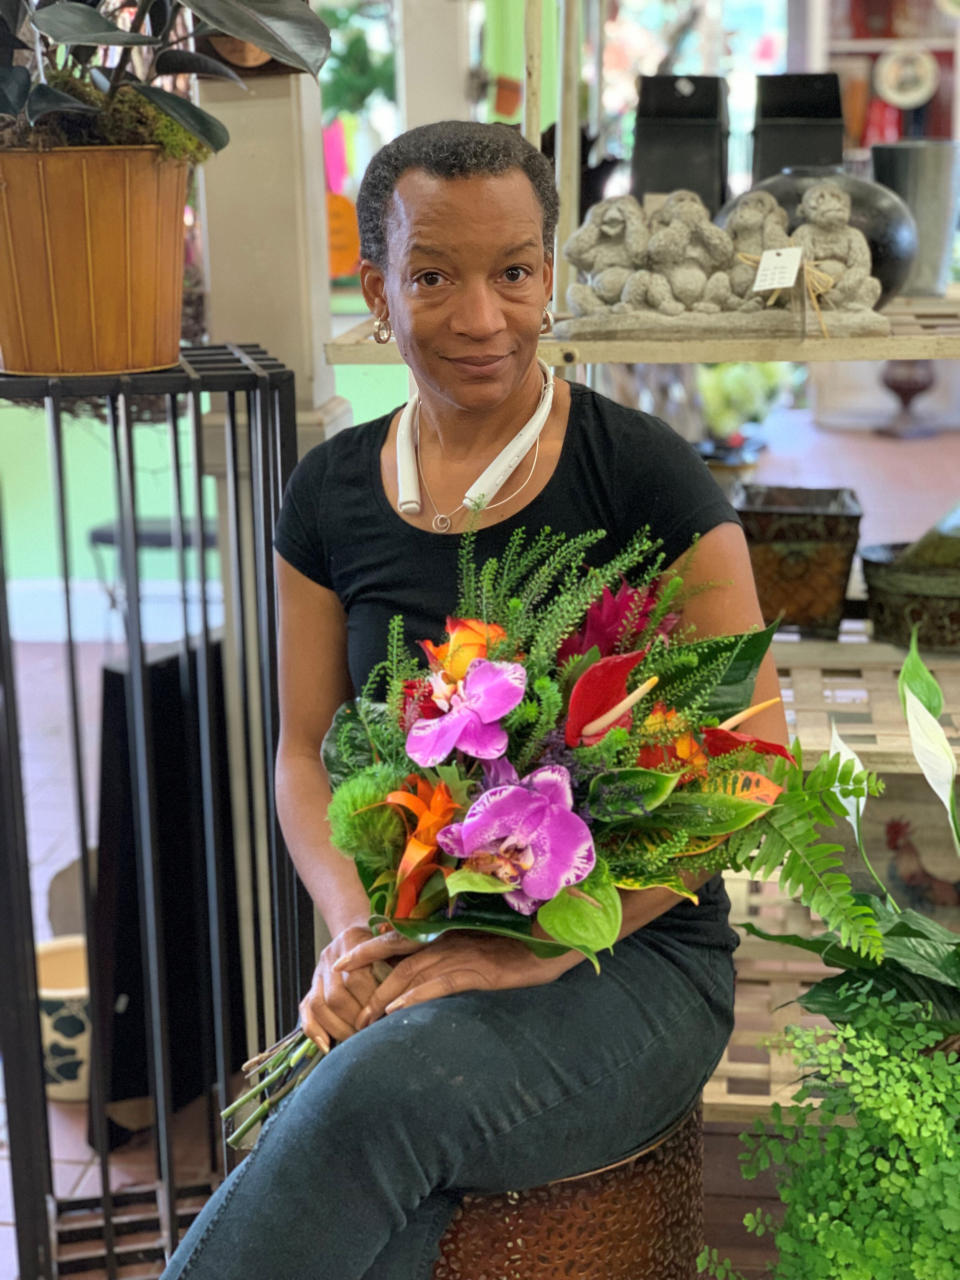 In this May 31, 2019, photo provided by Angie Morton, Lisa Taylor poses with a flower arrangement taken at Rachel’s Flowers in Memphis, Tenn. An emergency management official in Shelby County, Tenn., said Taylor was found dead Saturday, Dec. 11, 2021, after a tree uprooted in a violent storm fell through the roof of her Memphis home, landing on Taylor as she slept. Co-workers said she recently left her job as a florist of 14 years for a government job at the Memphis airport. (Angie Morton via AP)